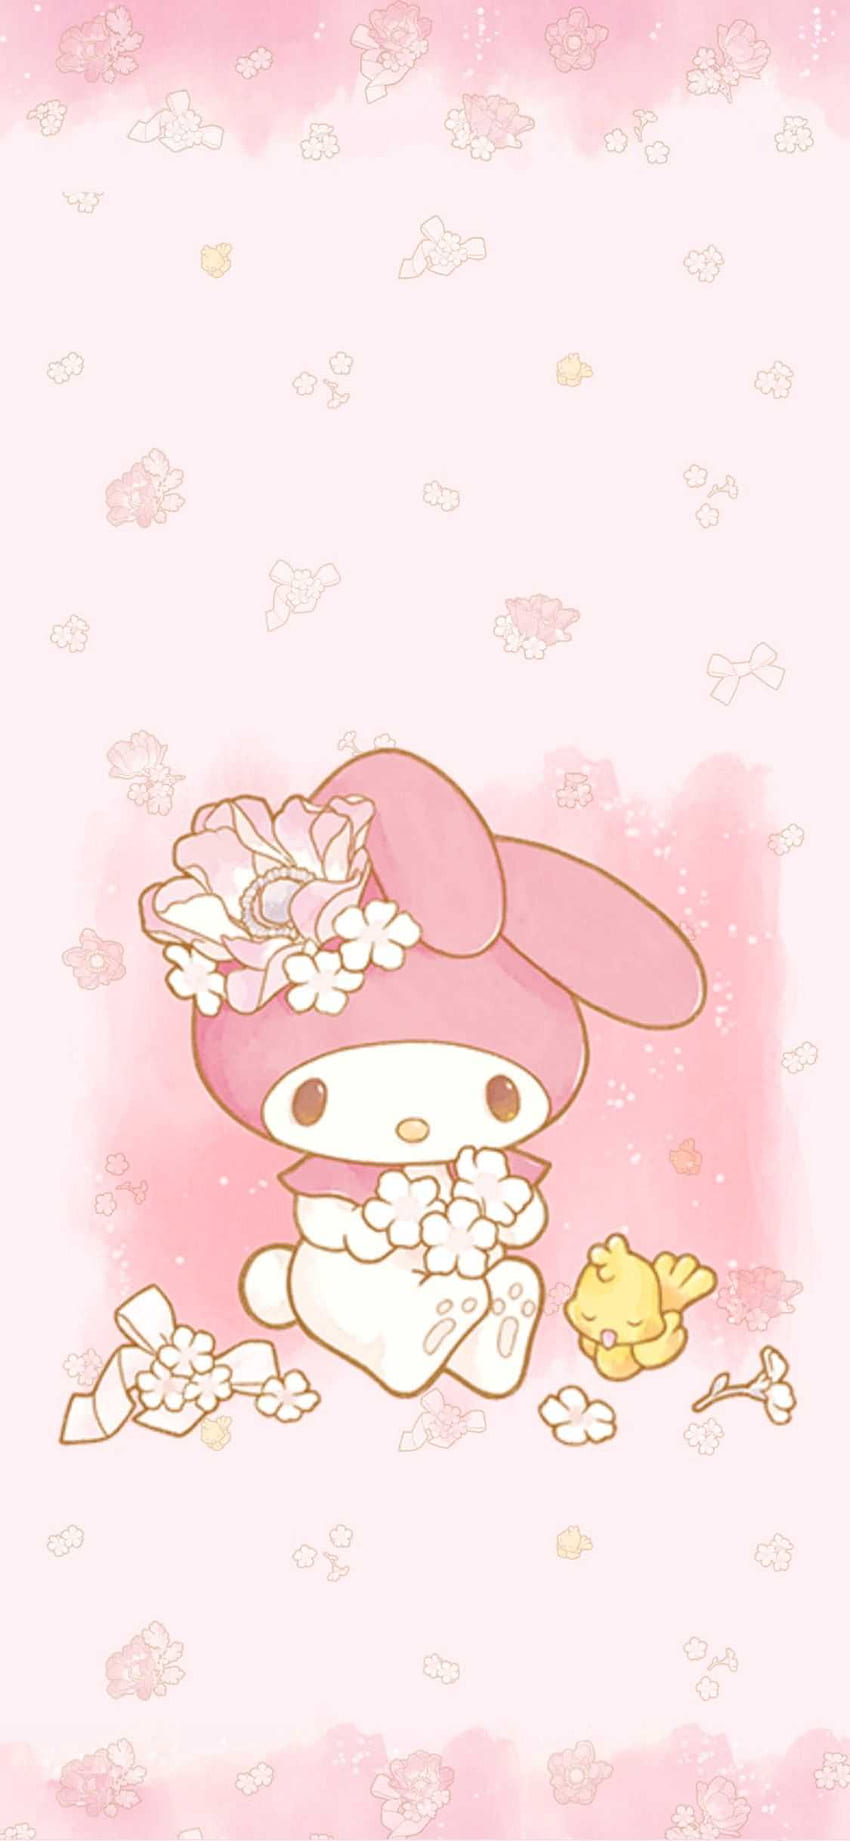 My Melody Wallpapers for Mobile  Singapore Atrium Sale  Facebook